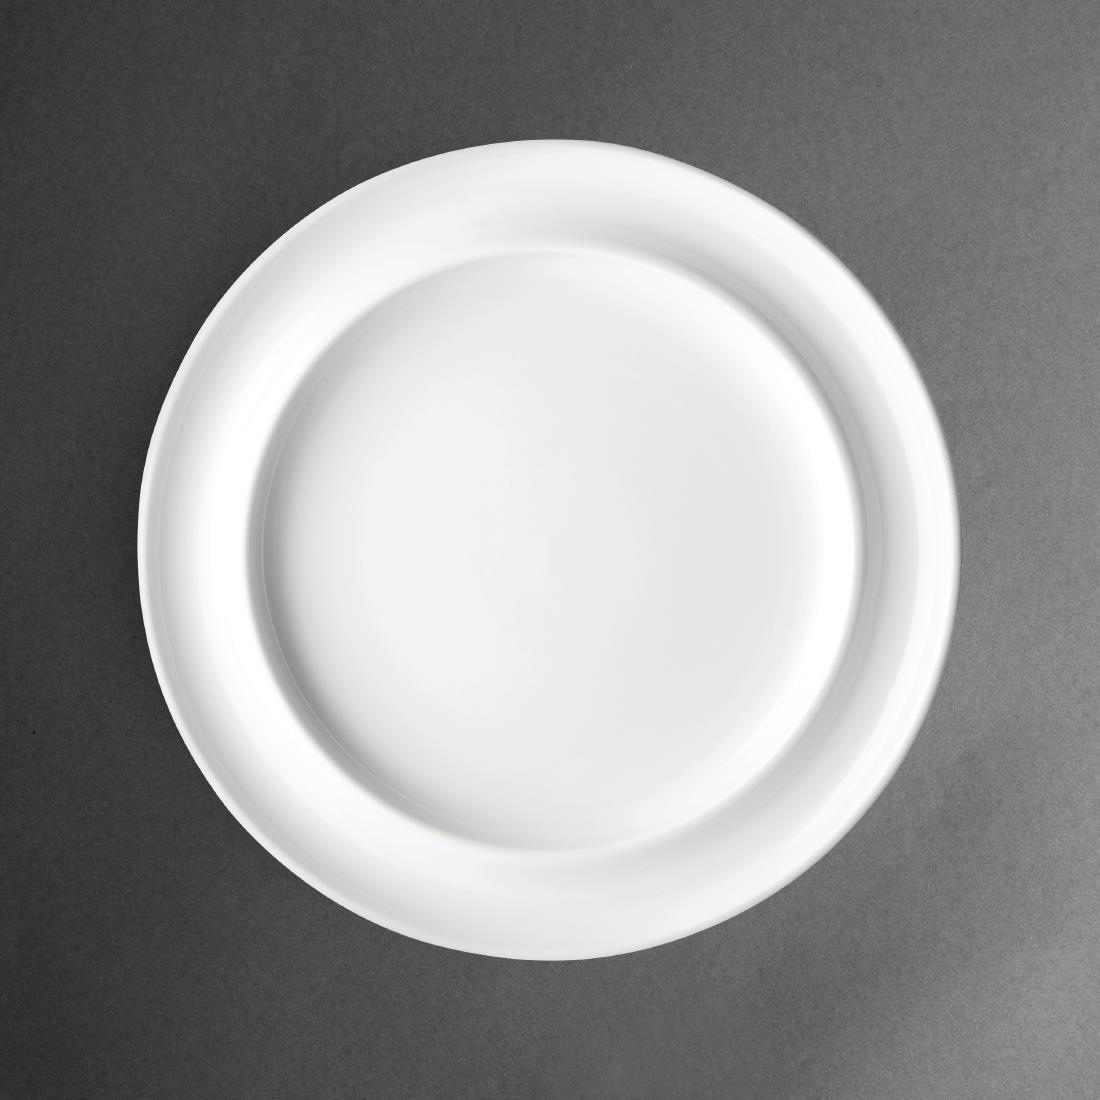 Olympia Heritage Raised Rim Plates White 253mm (Pack of 4) - DW153  - 1